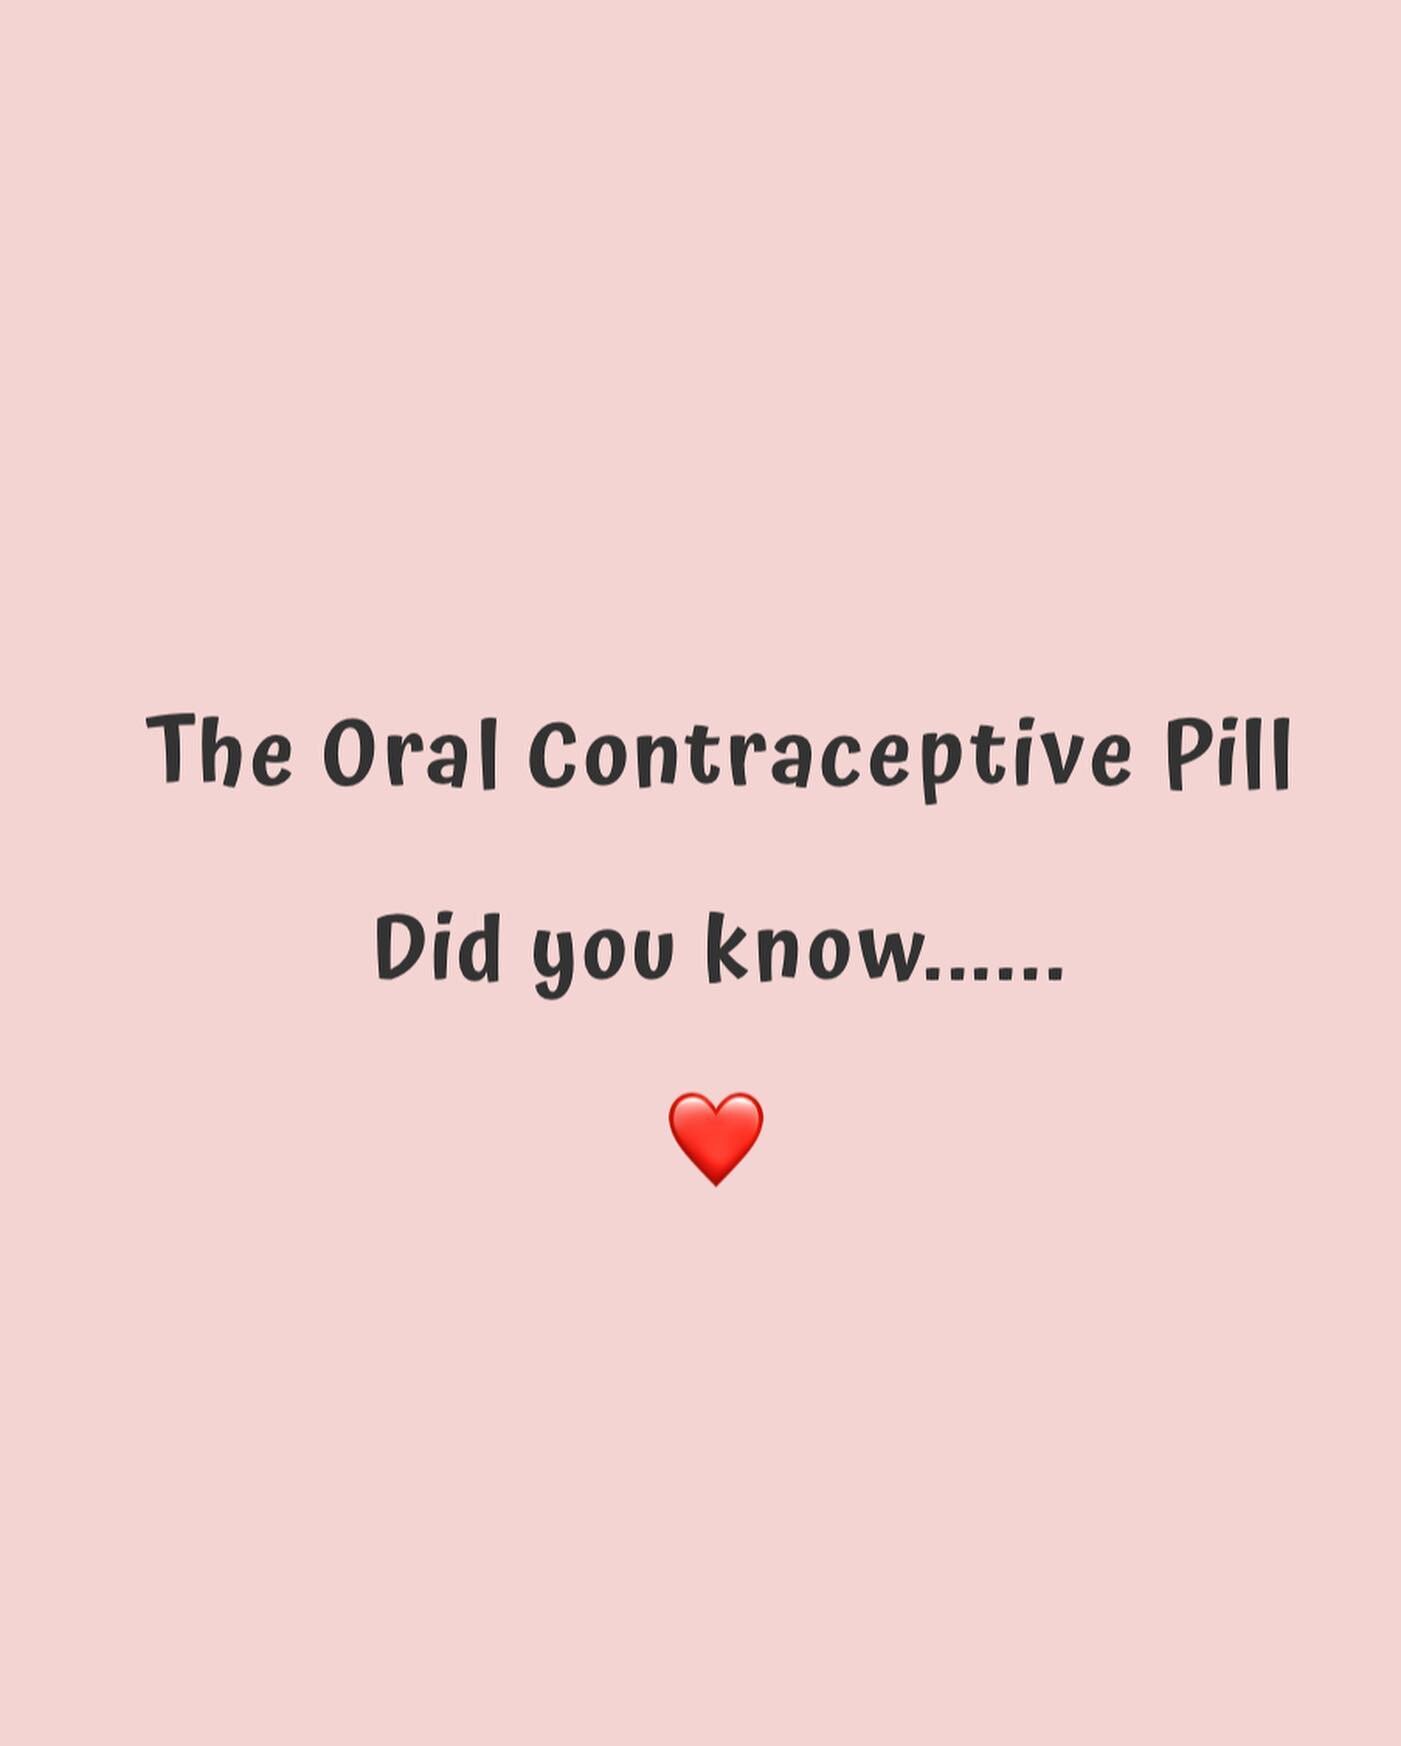 1️⃣The &lsquo;bleed&rsquo; you get on the OCP is not the same as a natural period

The OCP stops your body from producing hormones that are involved in the menstrual cycle, preventing ovulation. 

When you take your 7 day break, the hormone levels dr